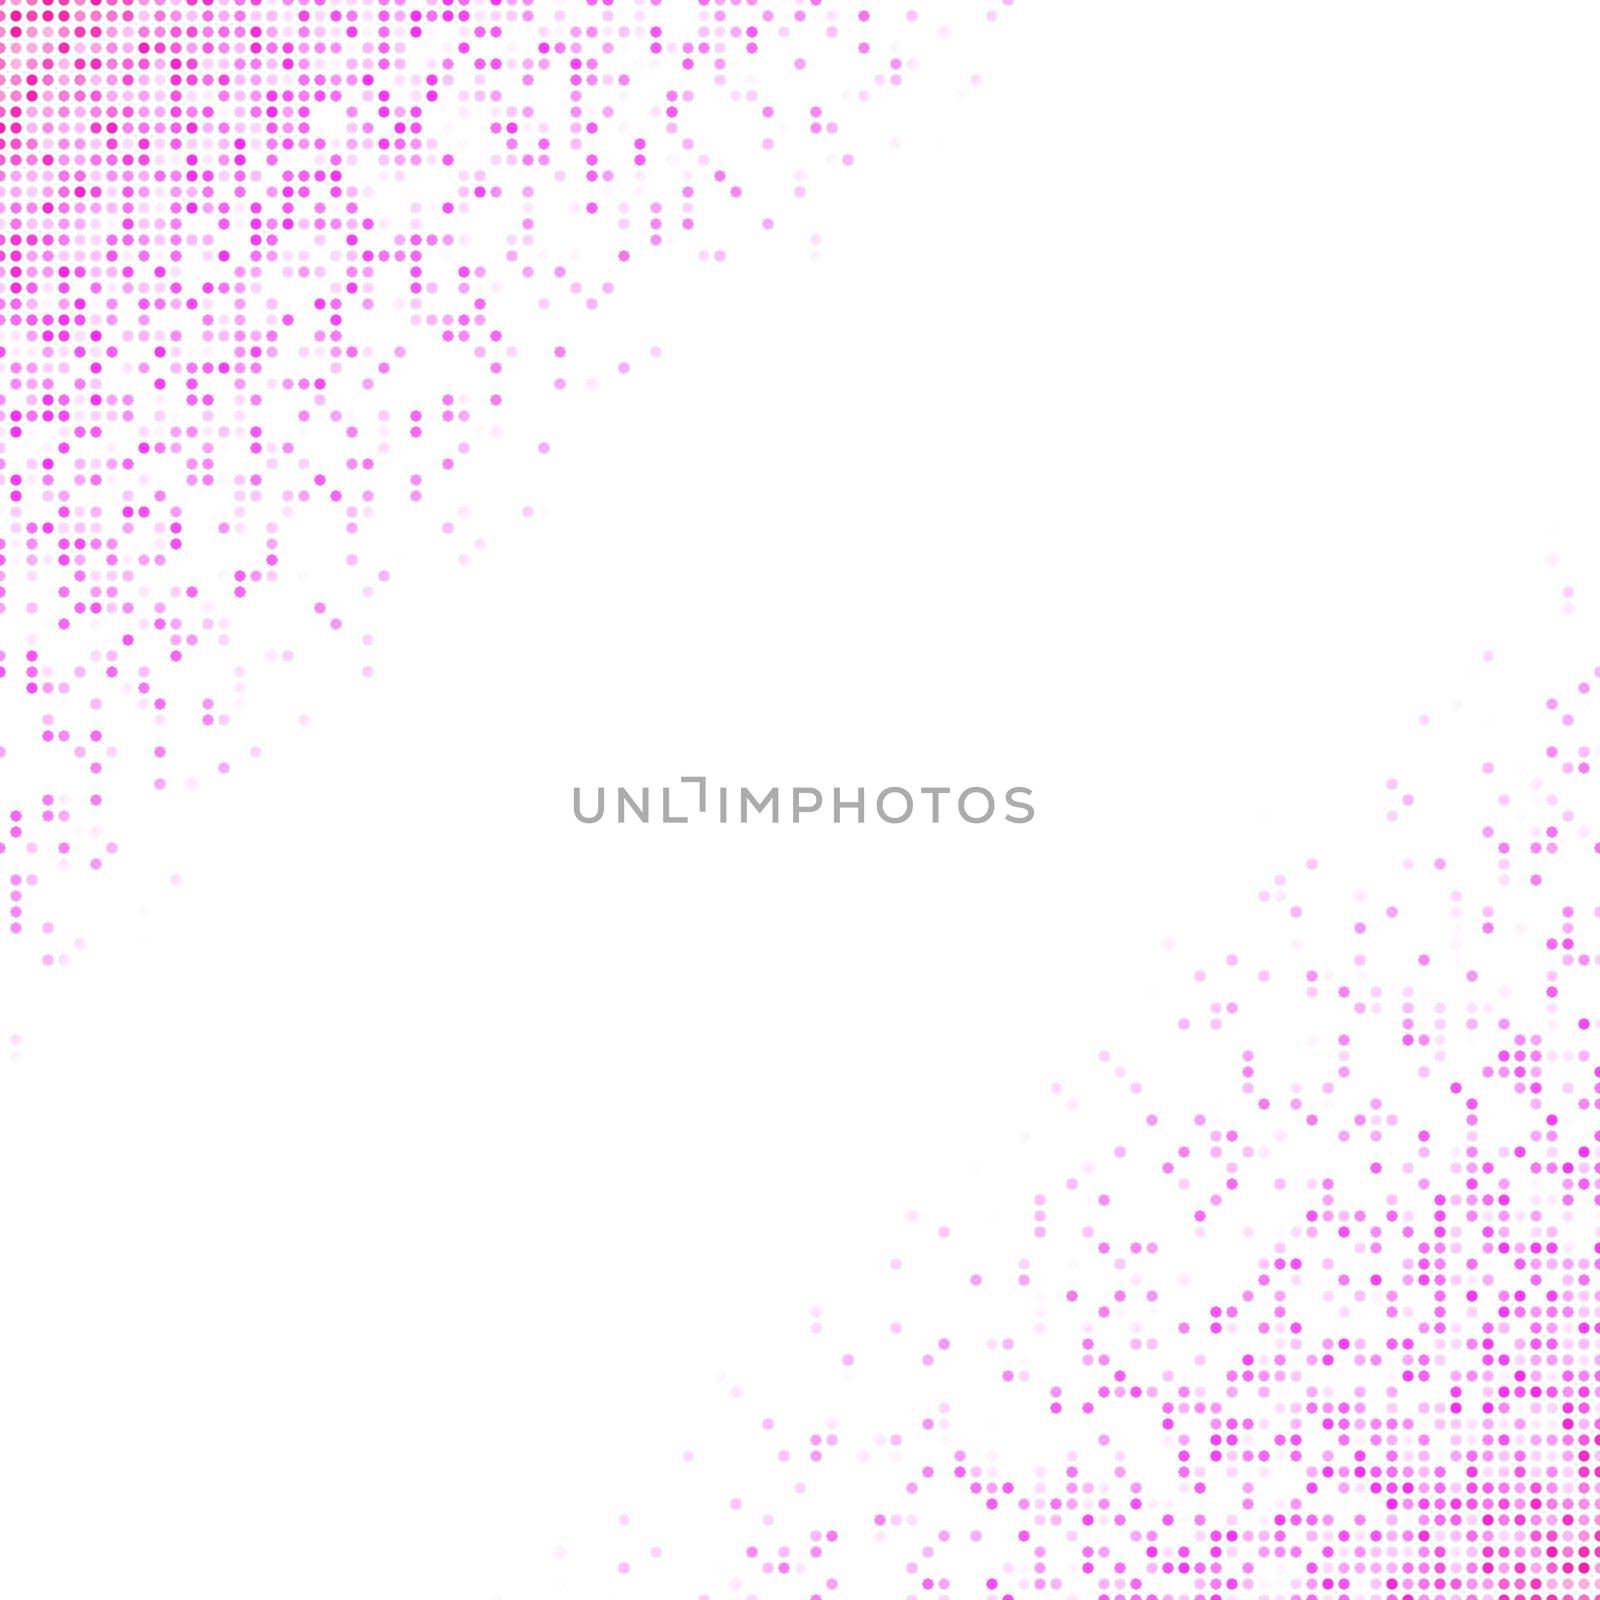 Abstract fashion polka dots background. White seamless pattern with pink gradient circles. Template design for invitation, poster, card, flyer, banner, textile, fabric.